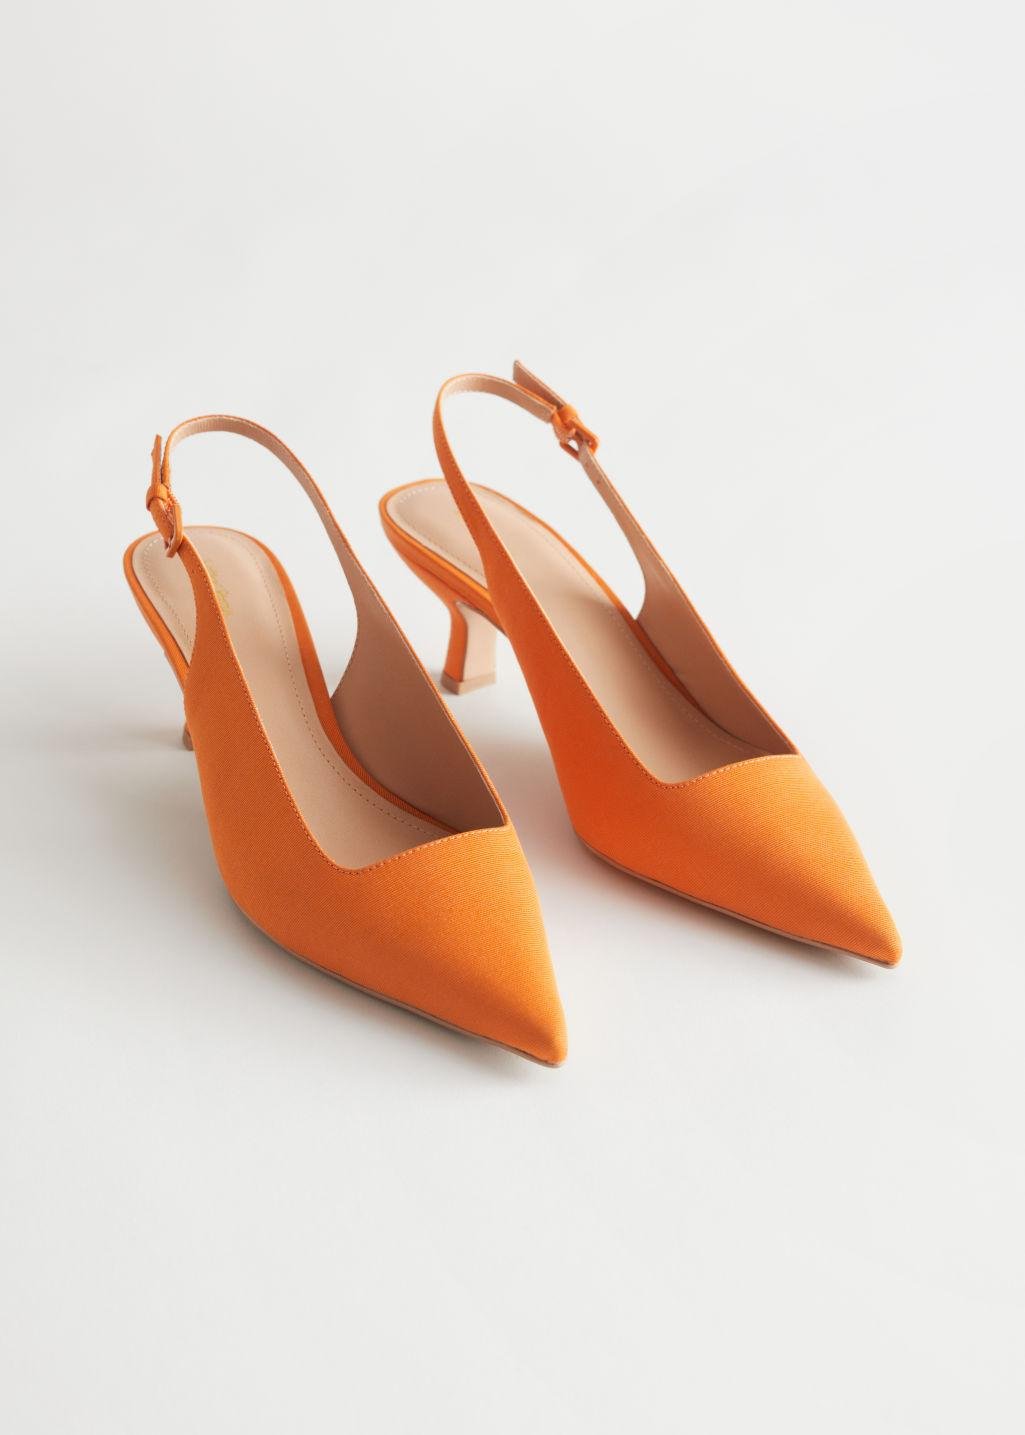 & Other Stories Pointed Slingback Pumps in Orange | Lyst